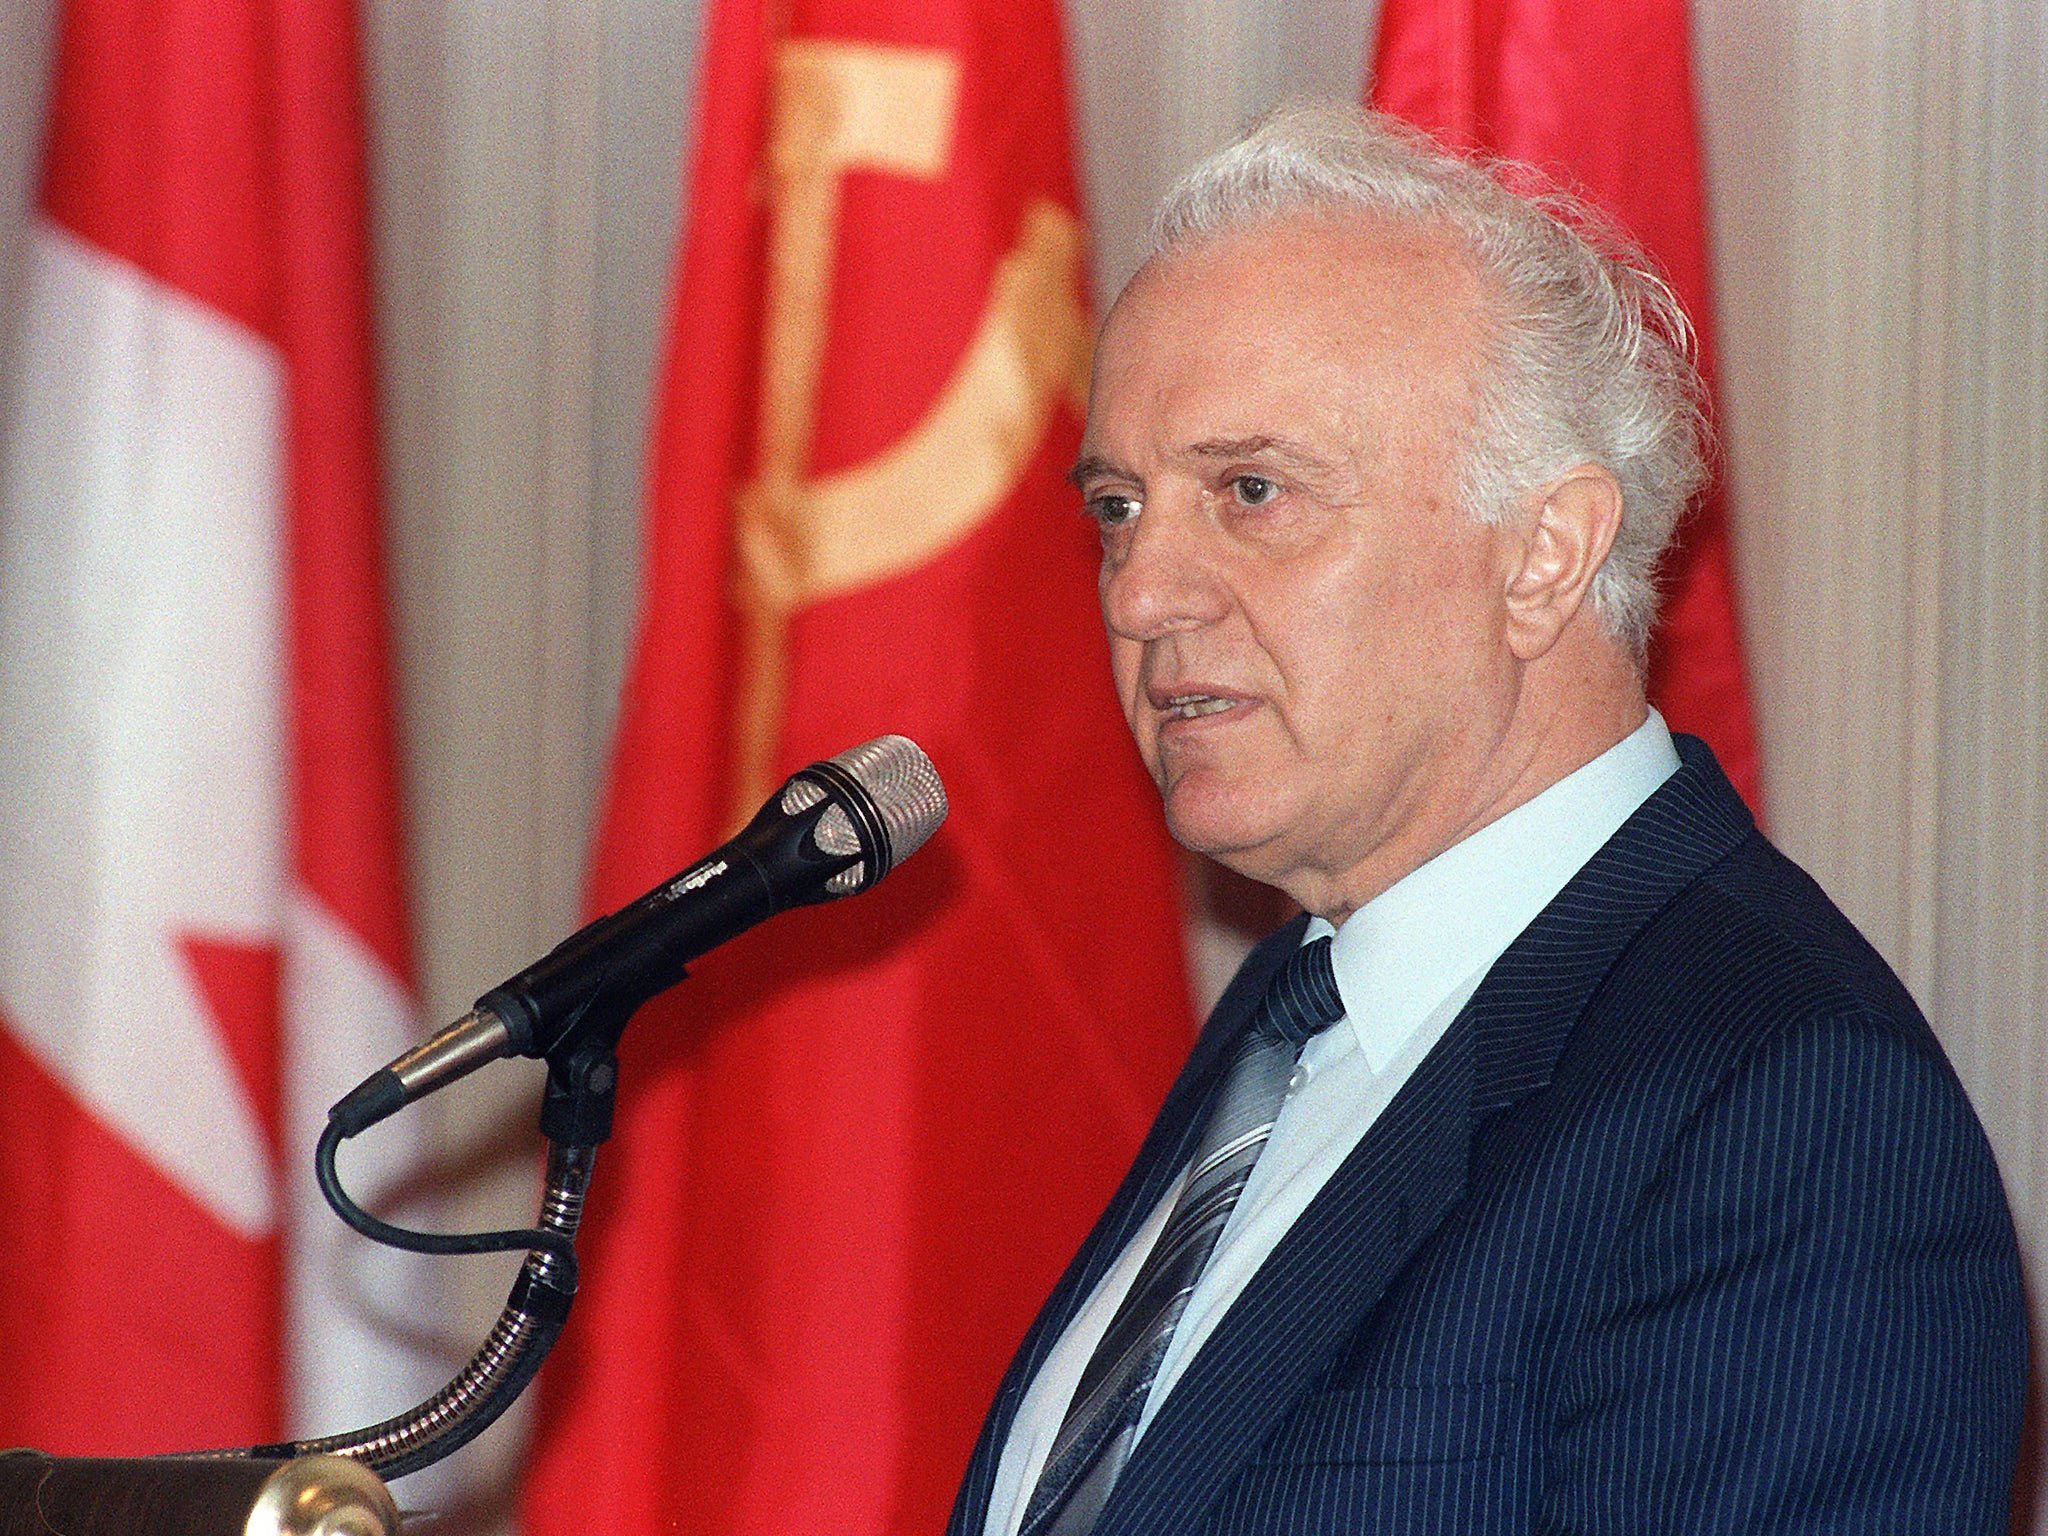 Soviet foreign minister Eduard Shevardnadze, who resigned in 1990 warning, correctly it transpired, of a right-wing coup